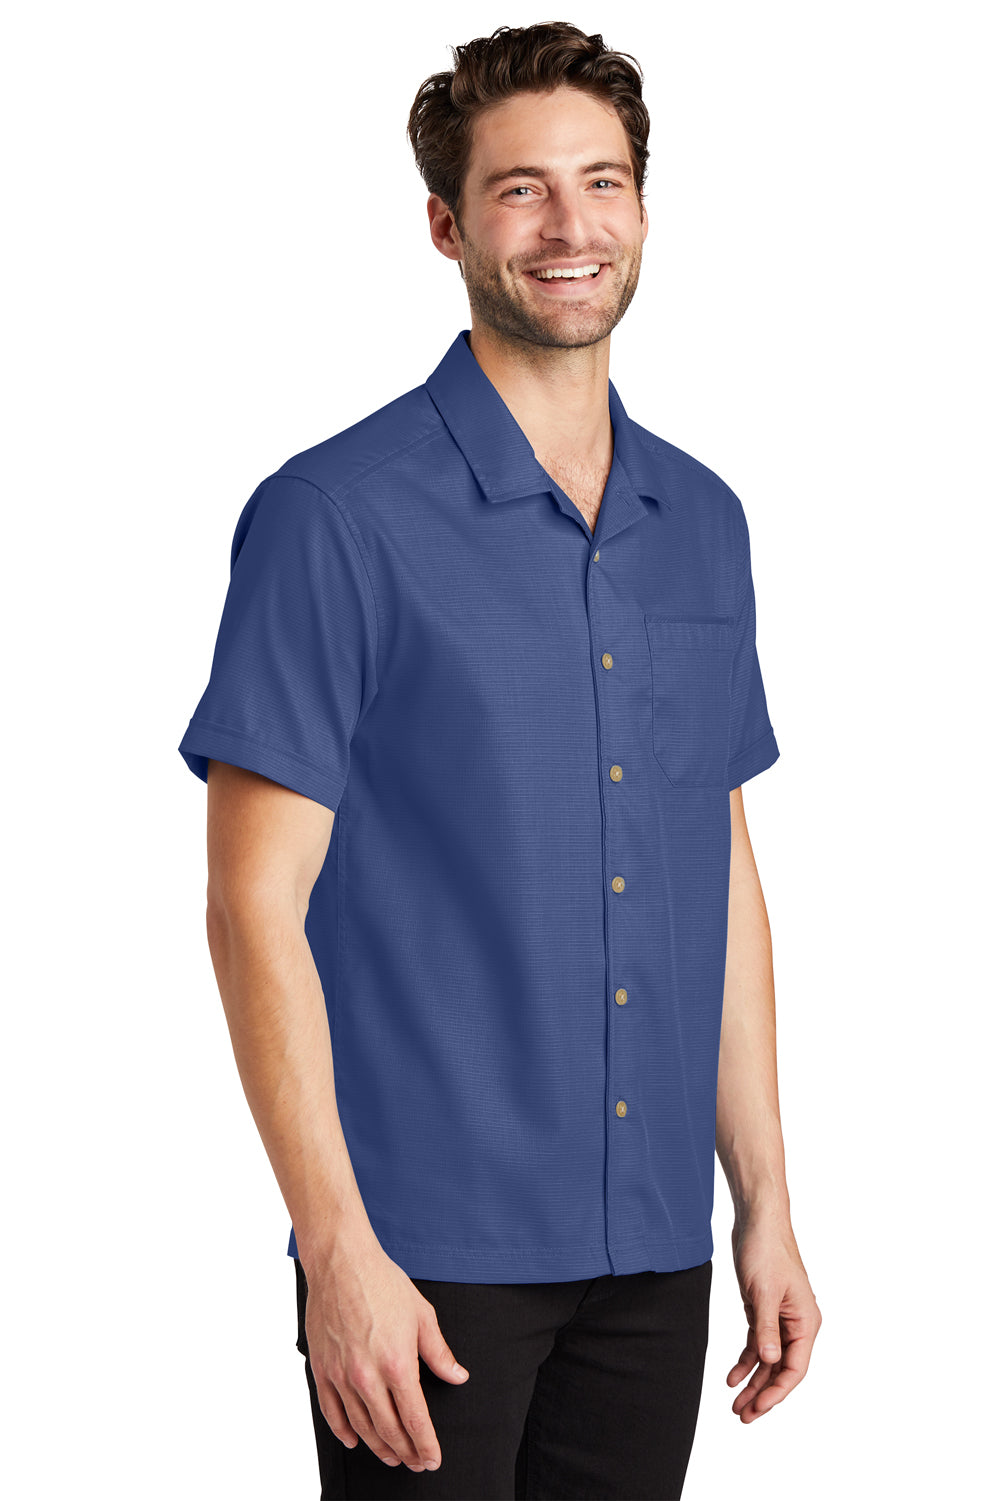 Port Authority S662 Wrinkle Resistant Short Sleeve Button Down Camp Shirt w/ Pocket Royal Blue 3Q